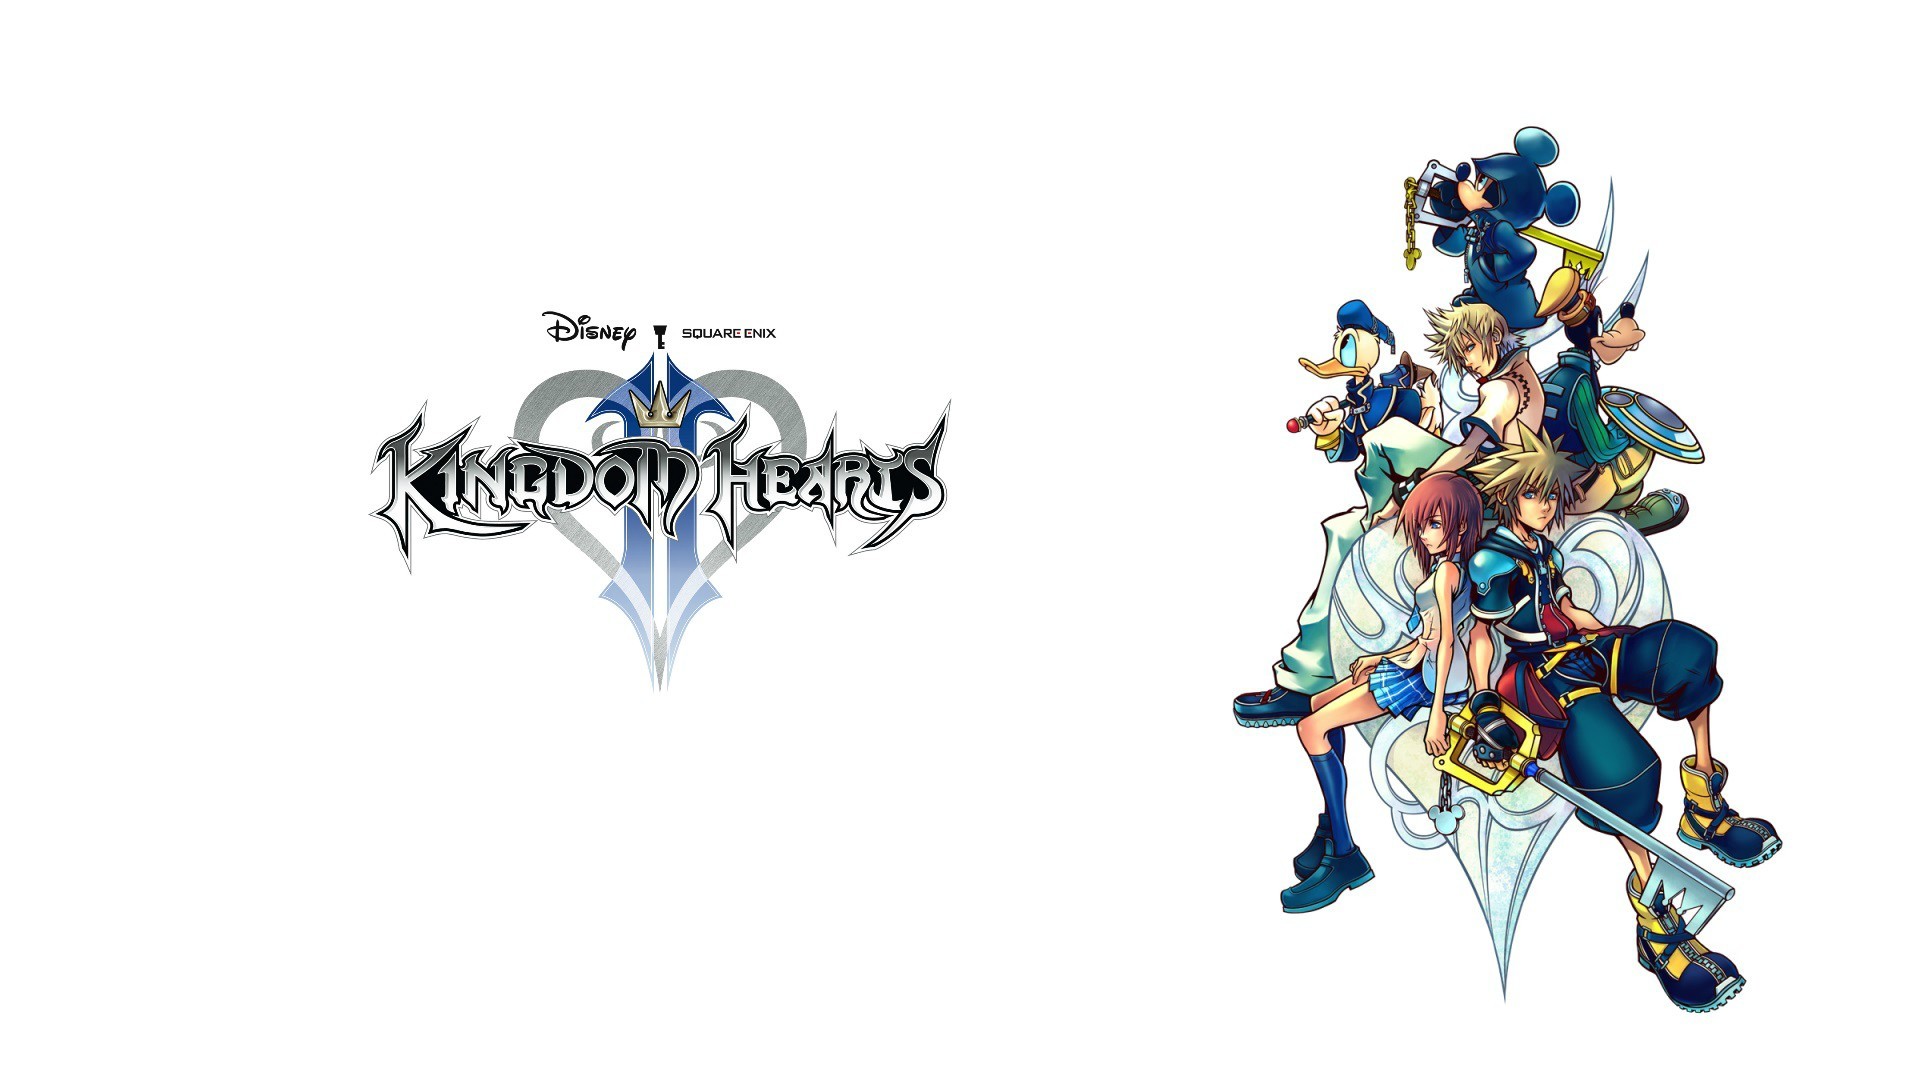 1920x1080 A "Simple and Clean" Kingdom Hearts 2 Wallpaper ...